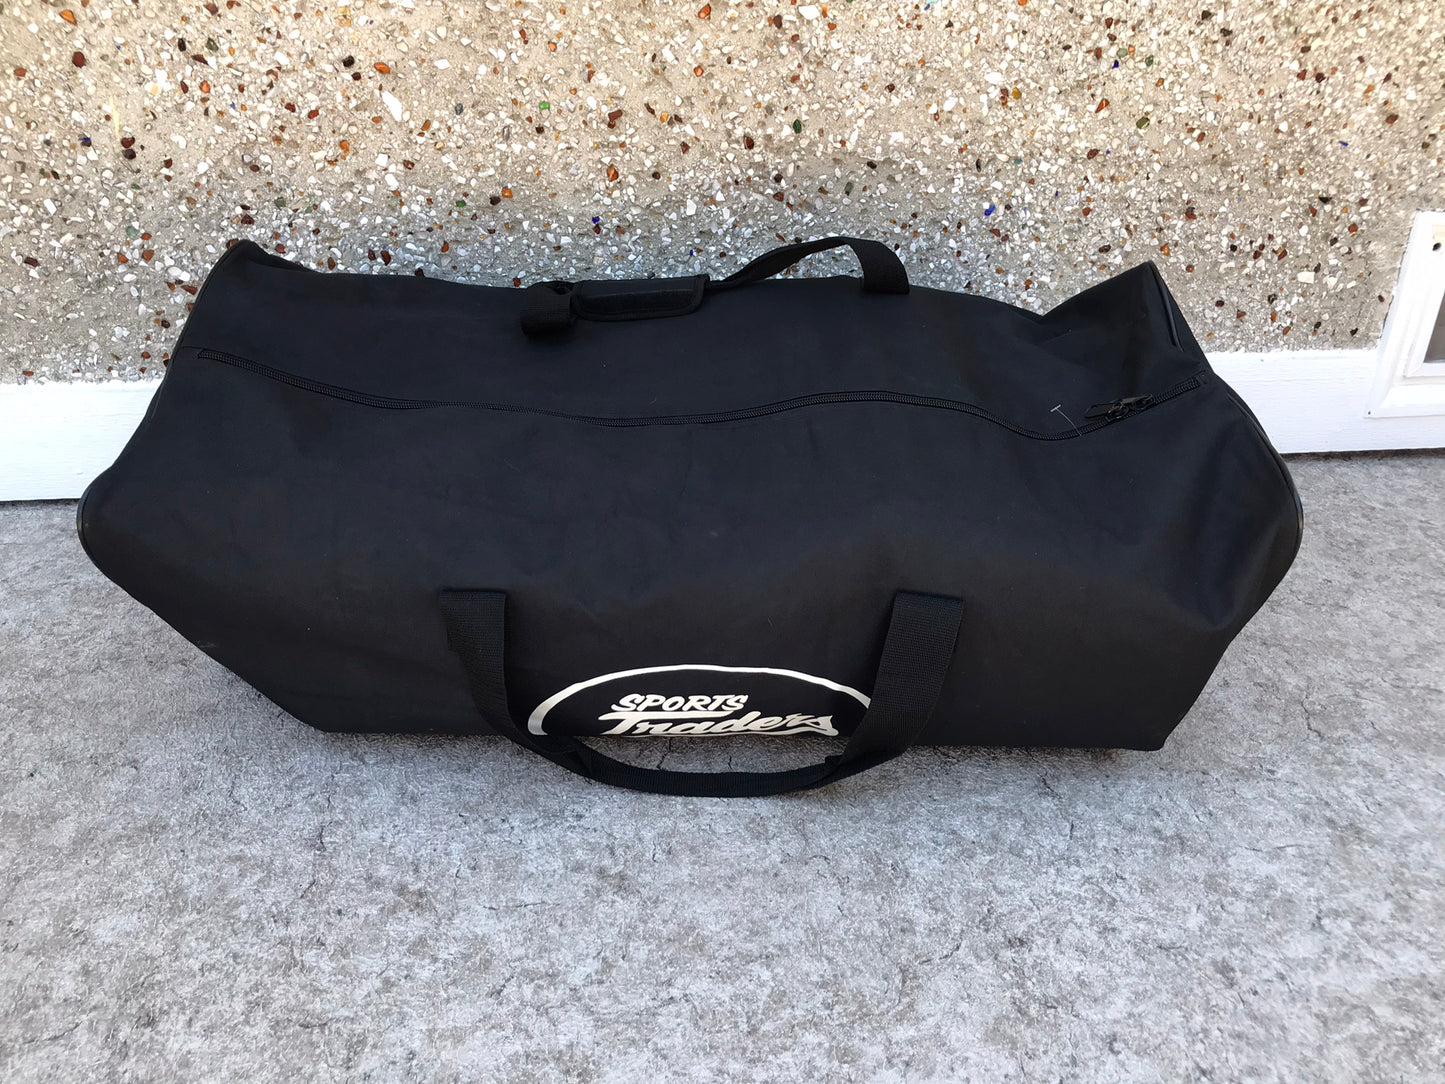 Hockey Duffle Bag Sports Traders Junior Size Excellent As New